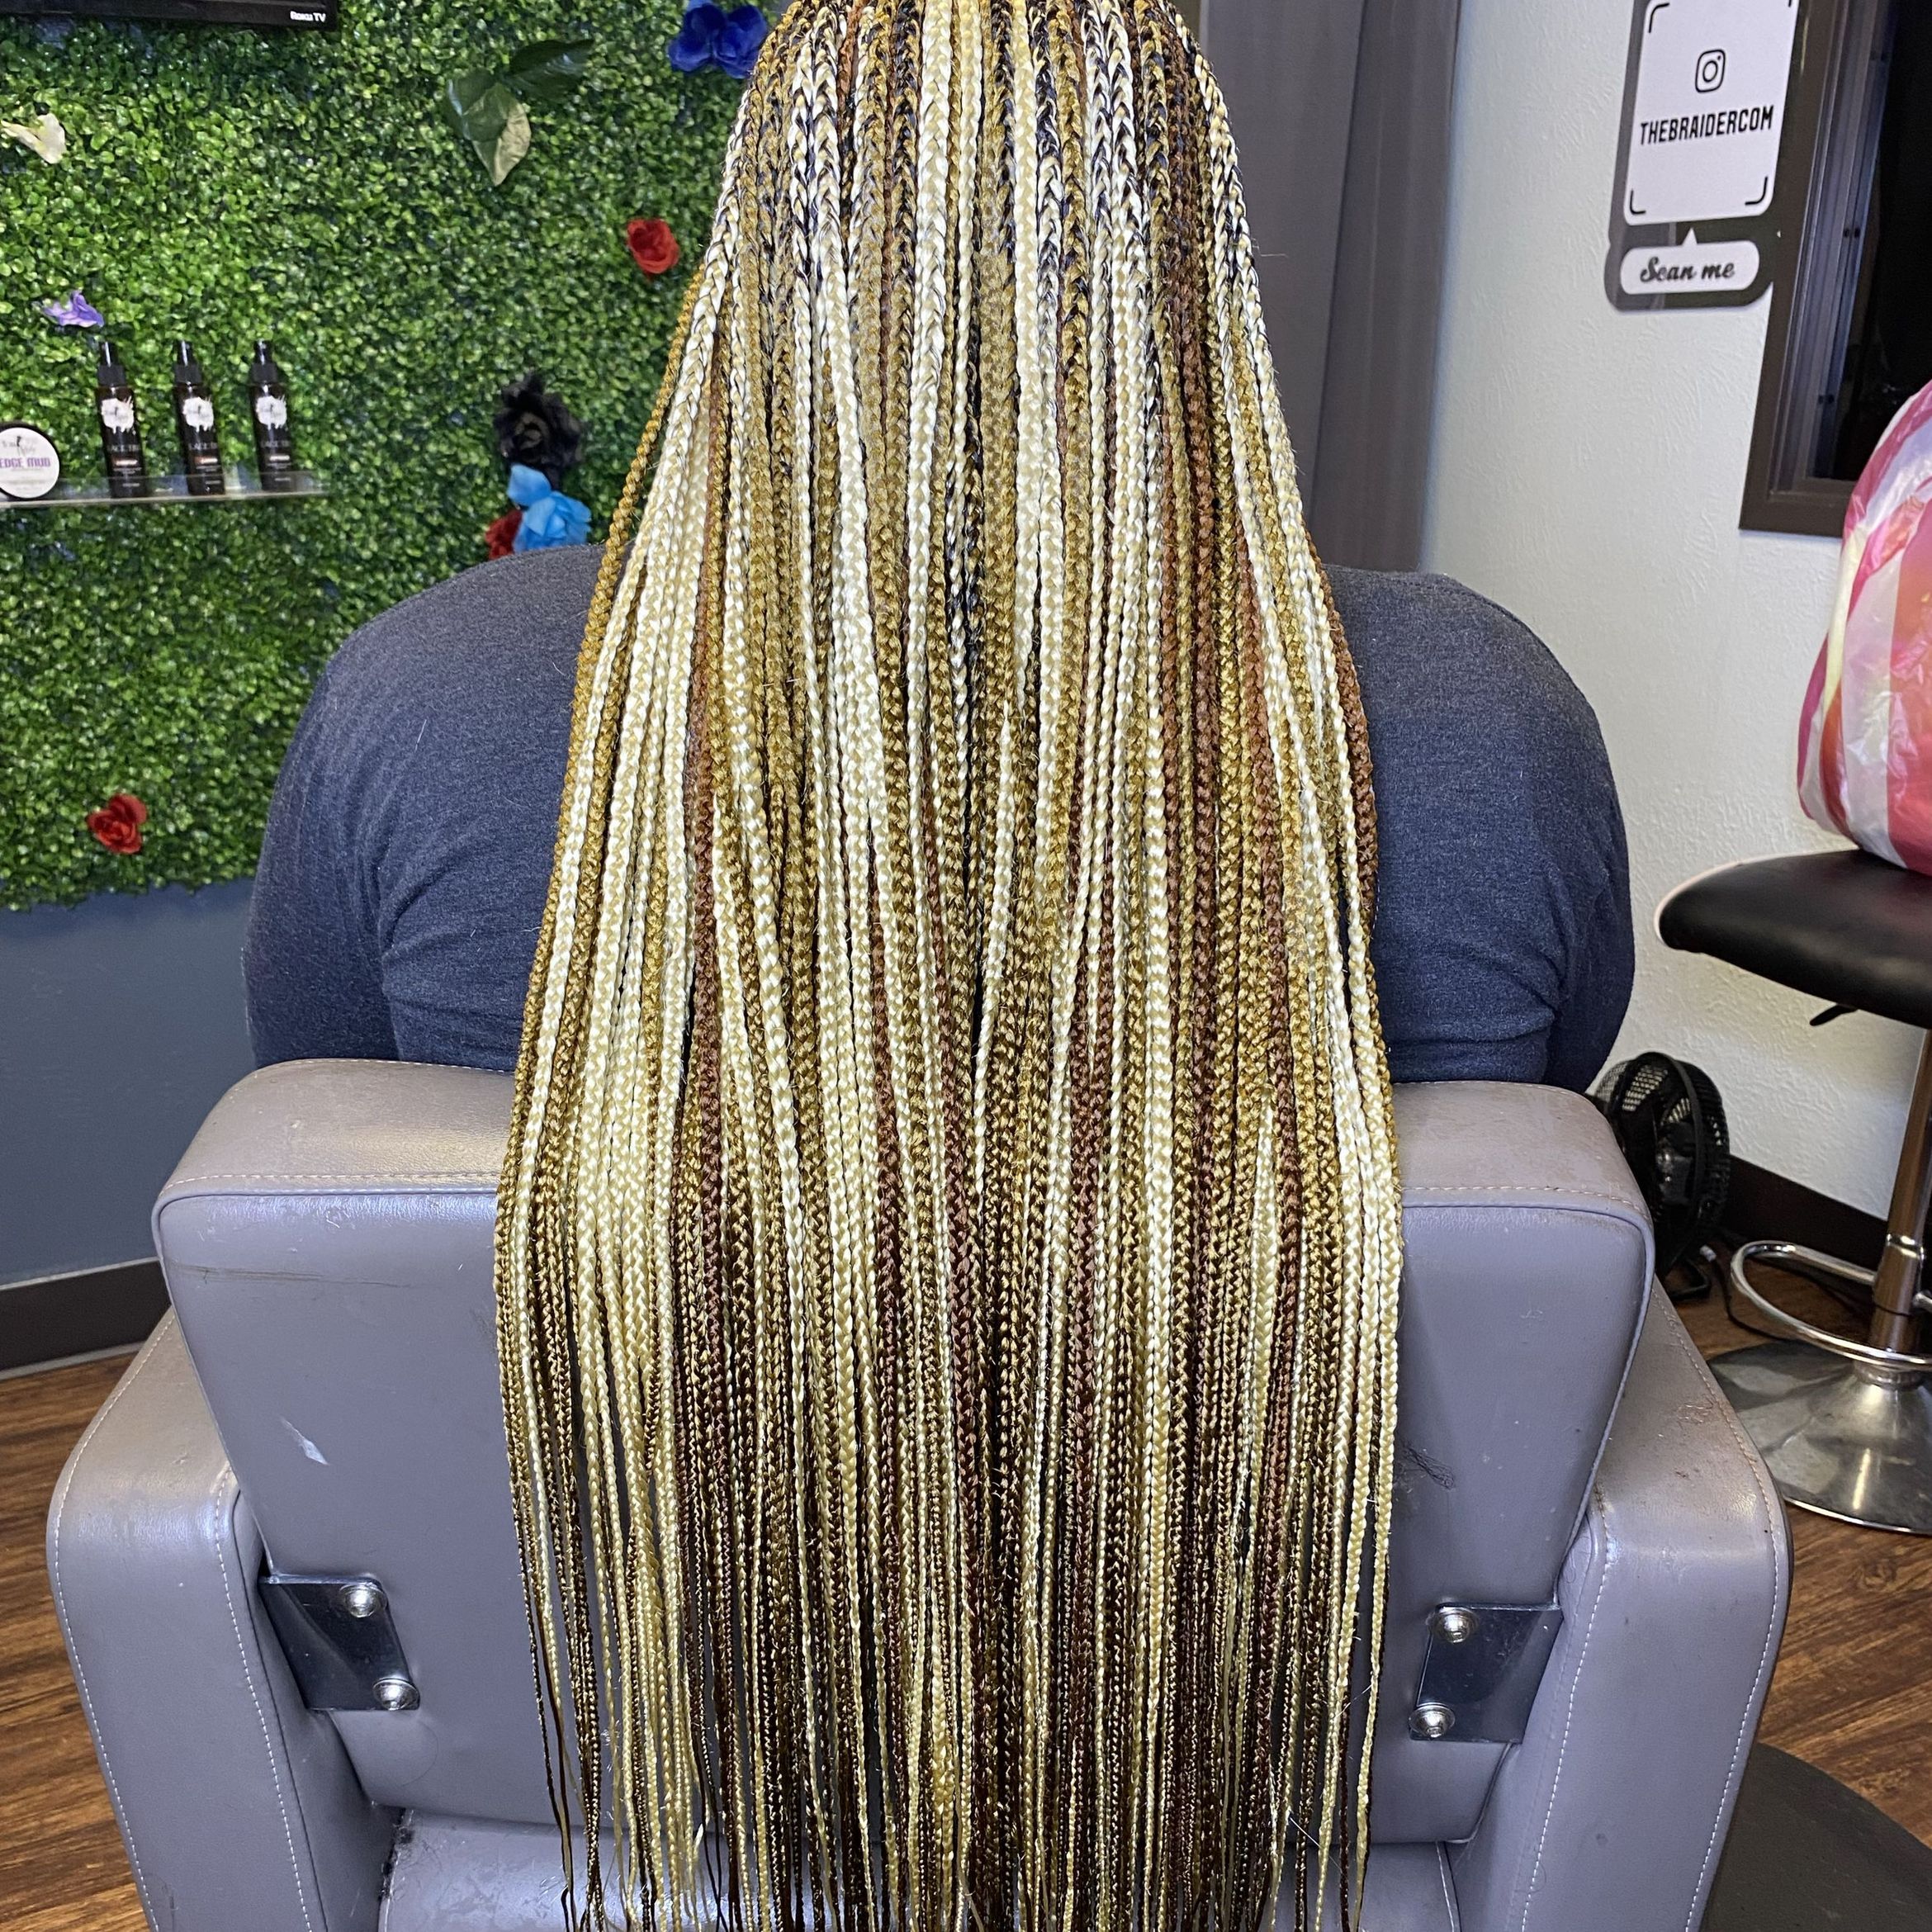 Thebraider Hair Academy - Duncanville - Book Online - Prices, Reviews ...